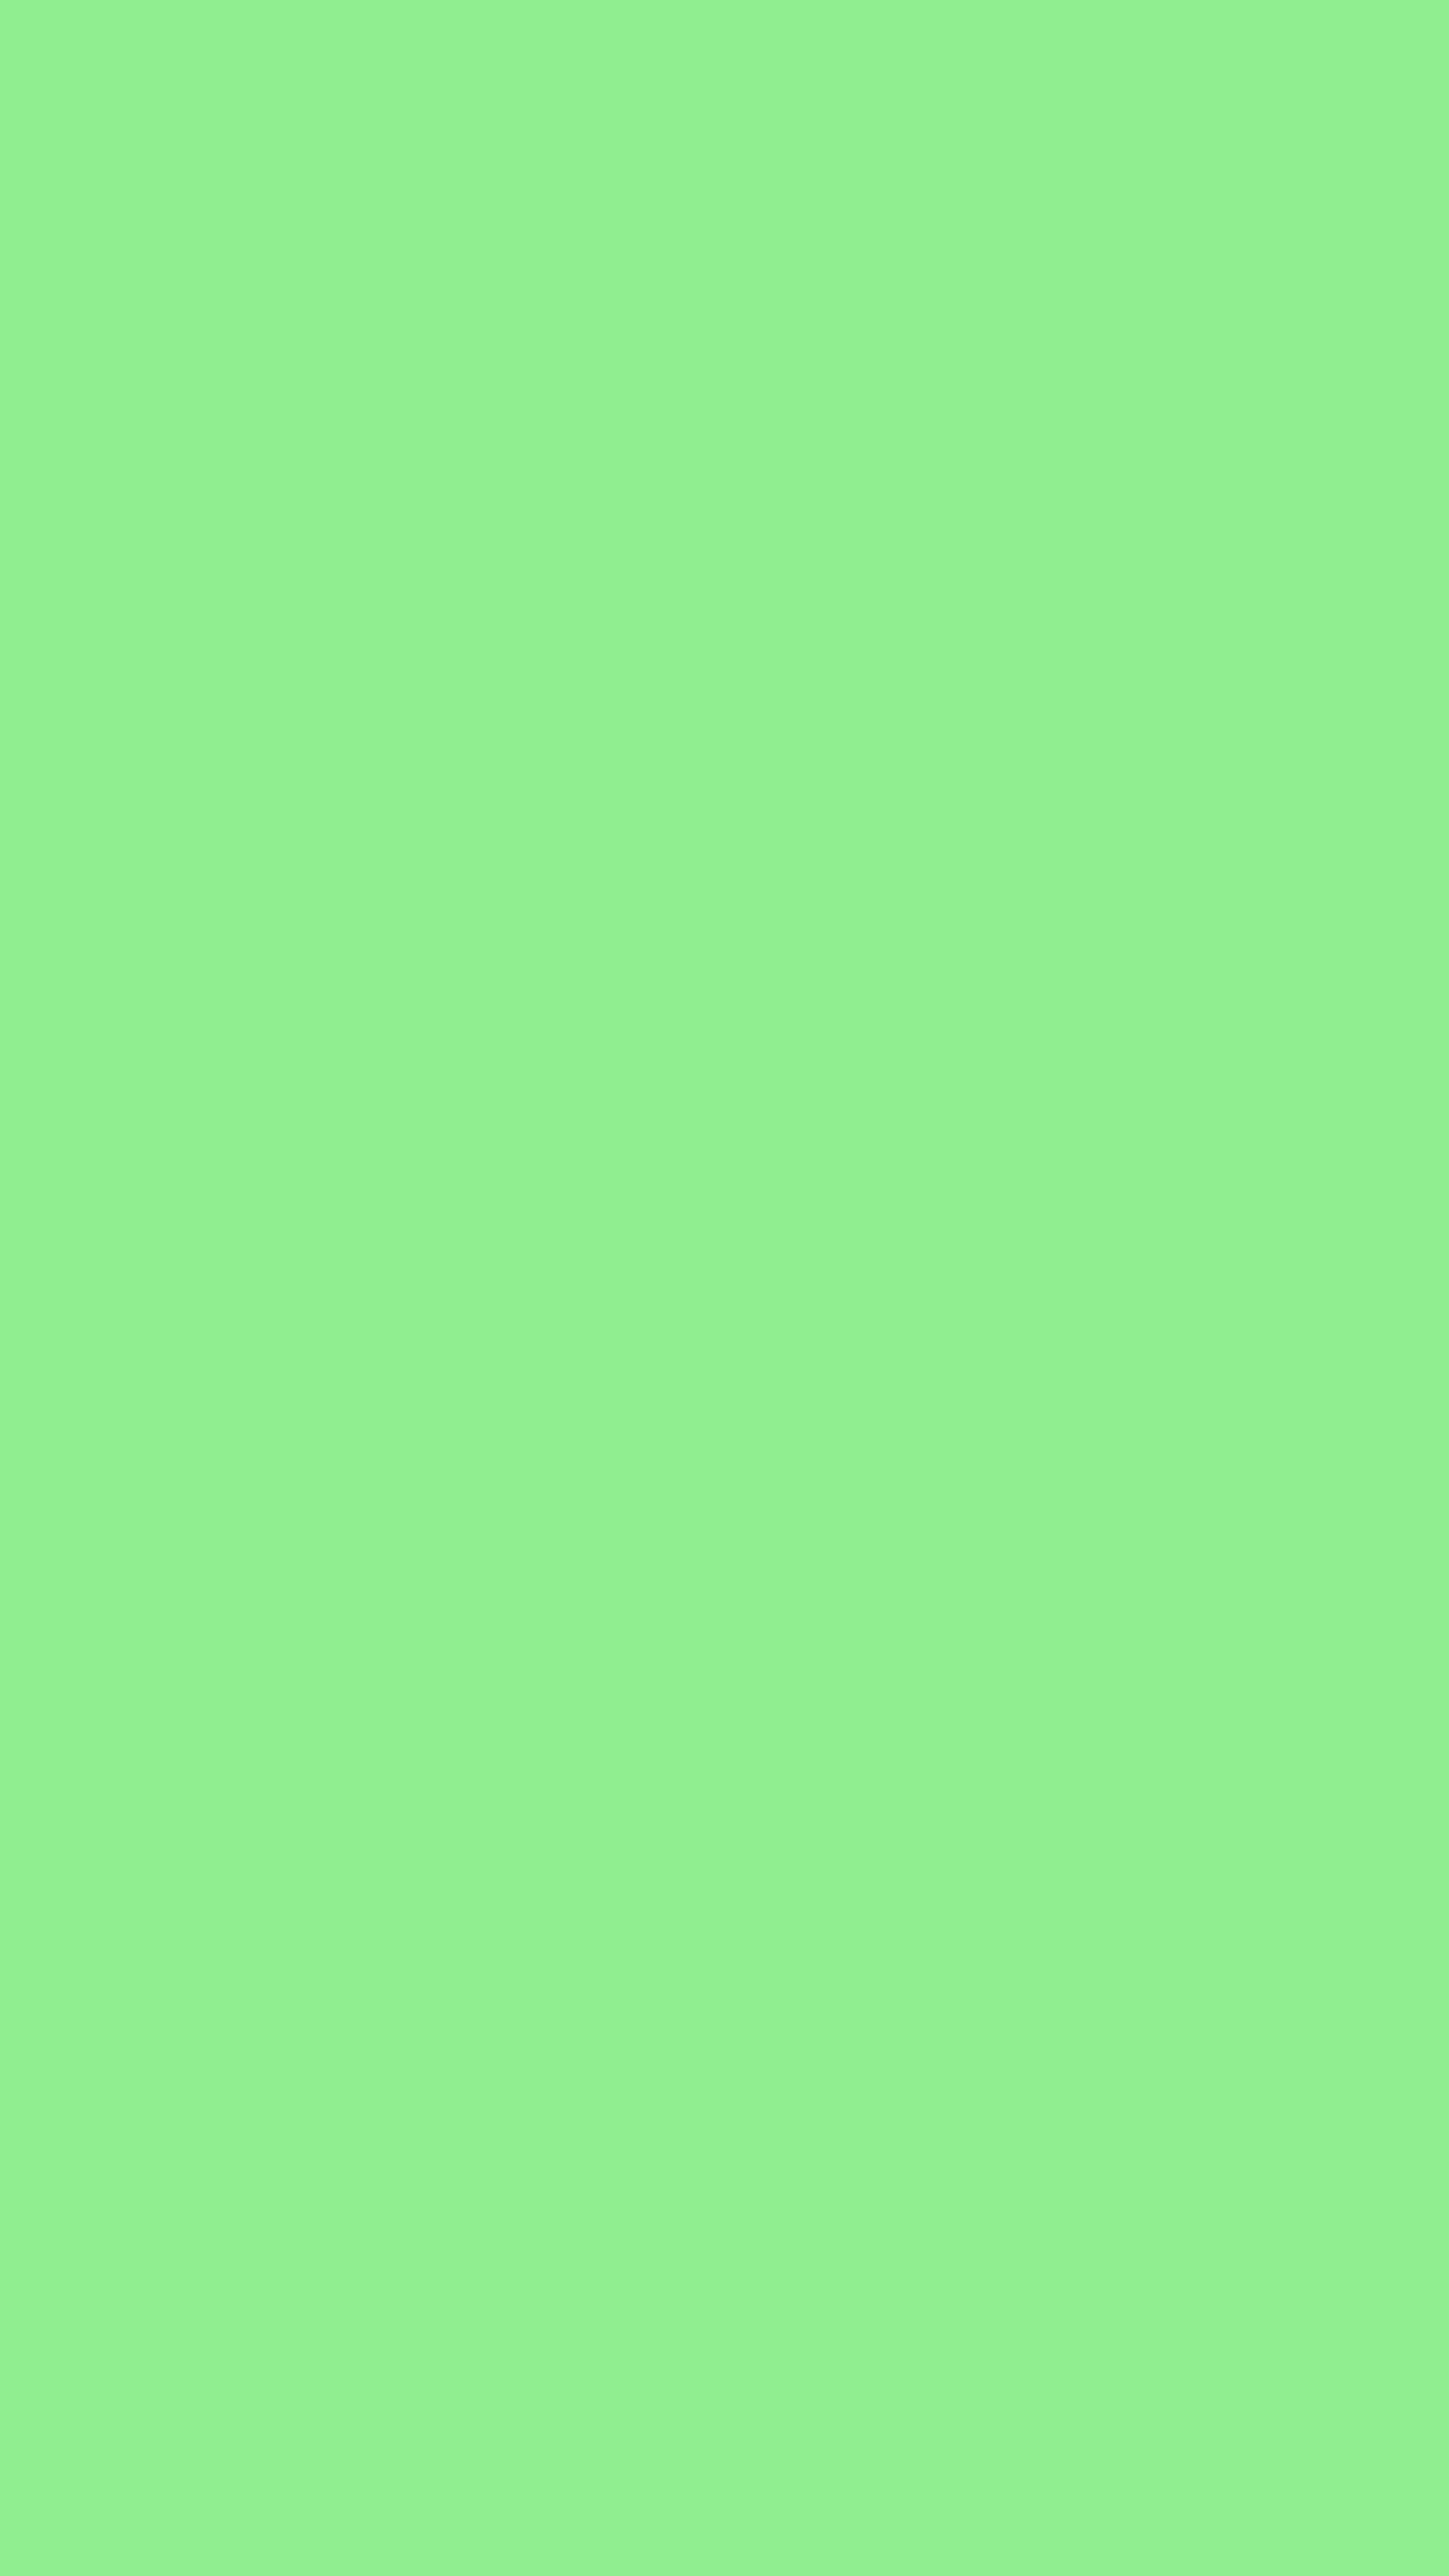 Light Green Solid Color Background Wallpaper For Mobile Phone | My XXX